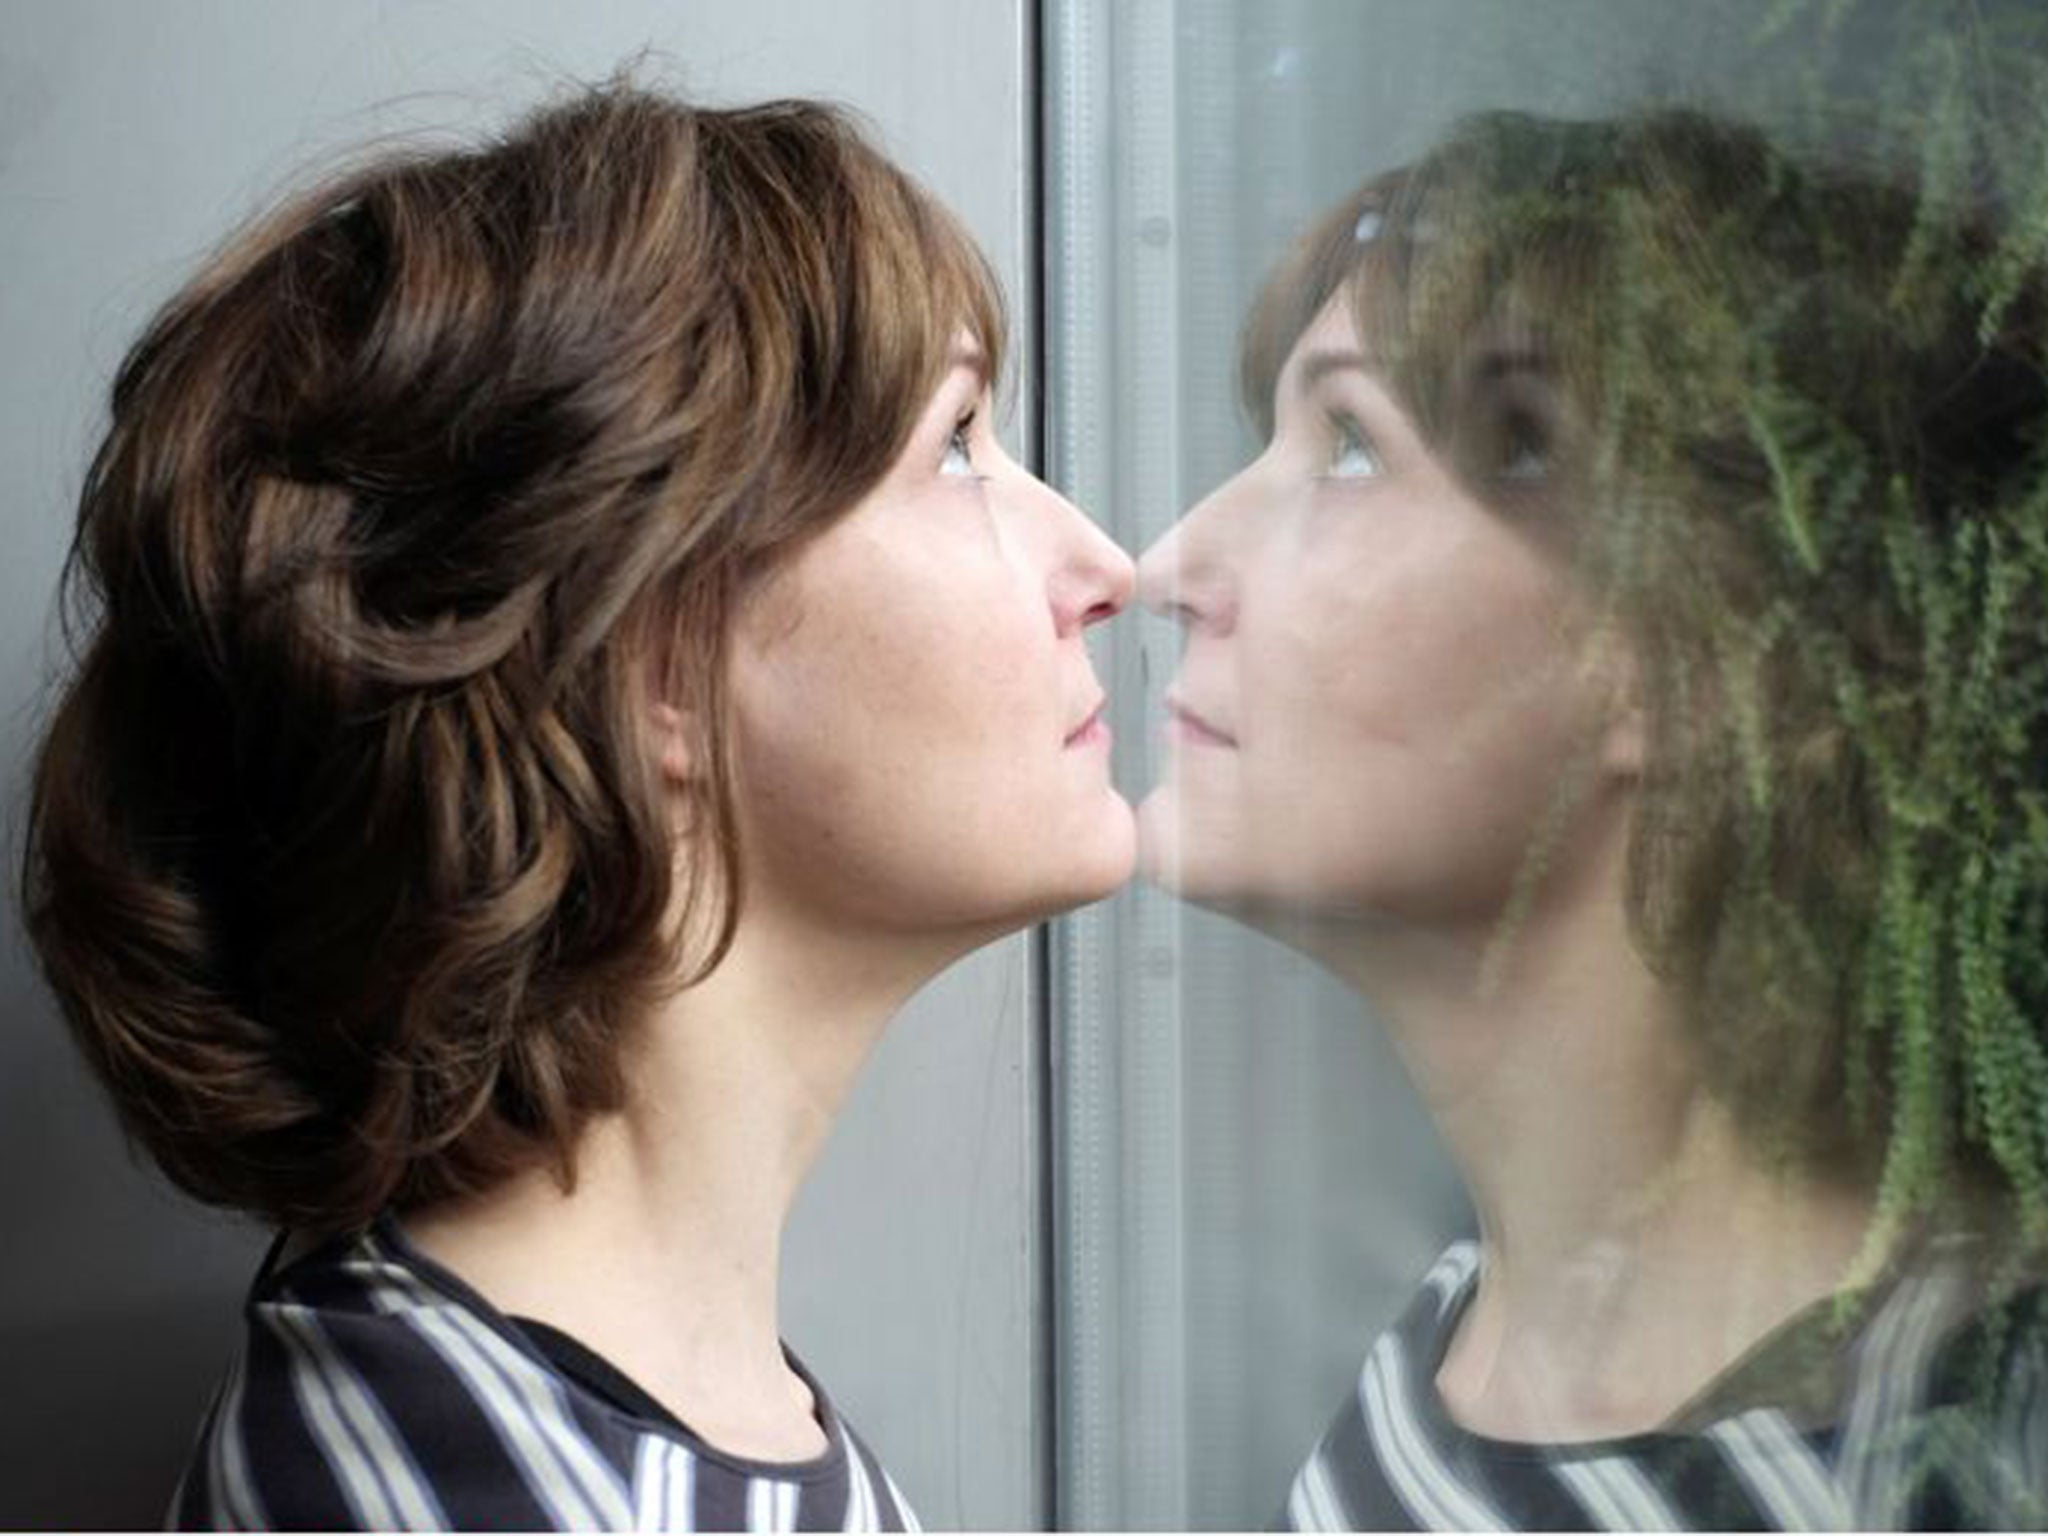 Through a glass: Viv Albertine, who has given an unvarnished account of her life